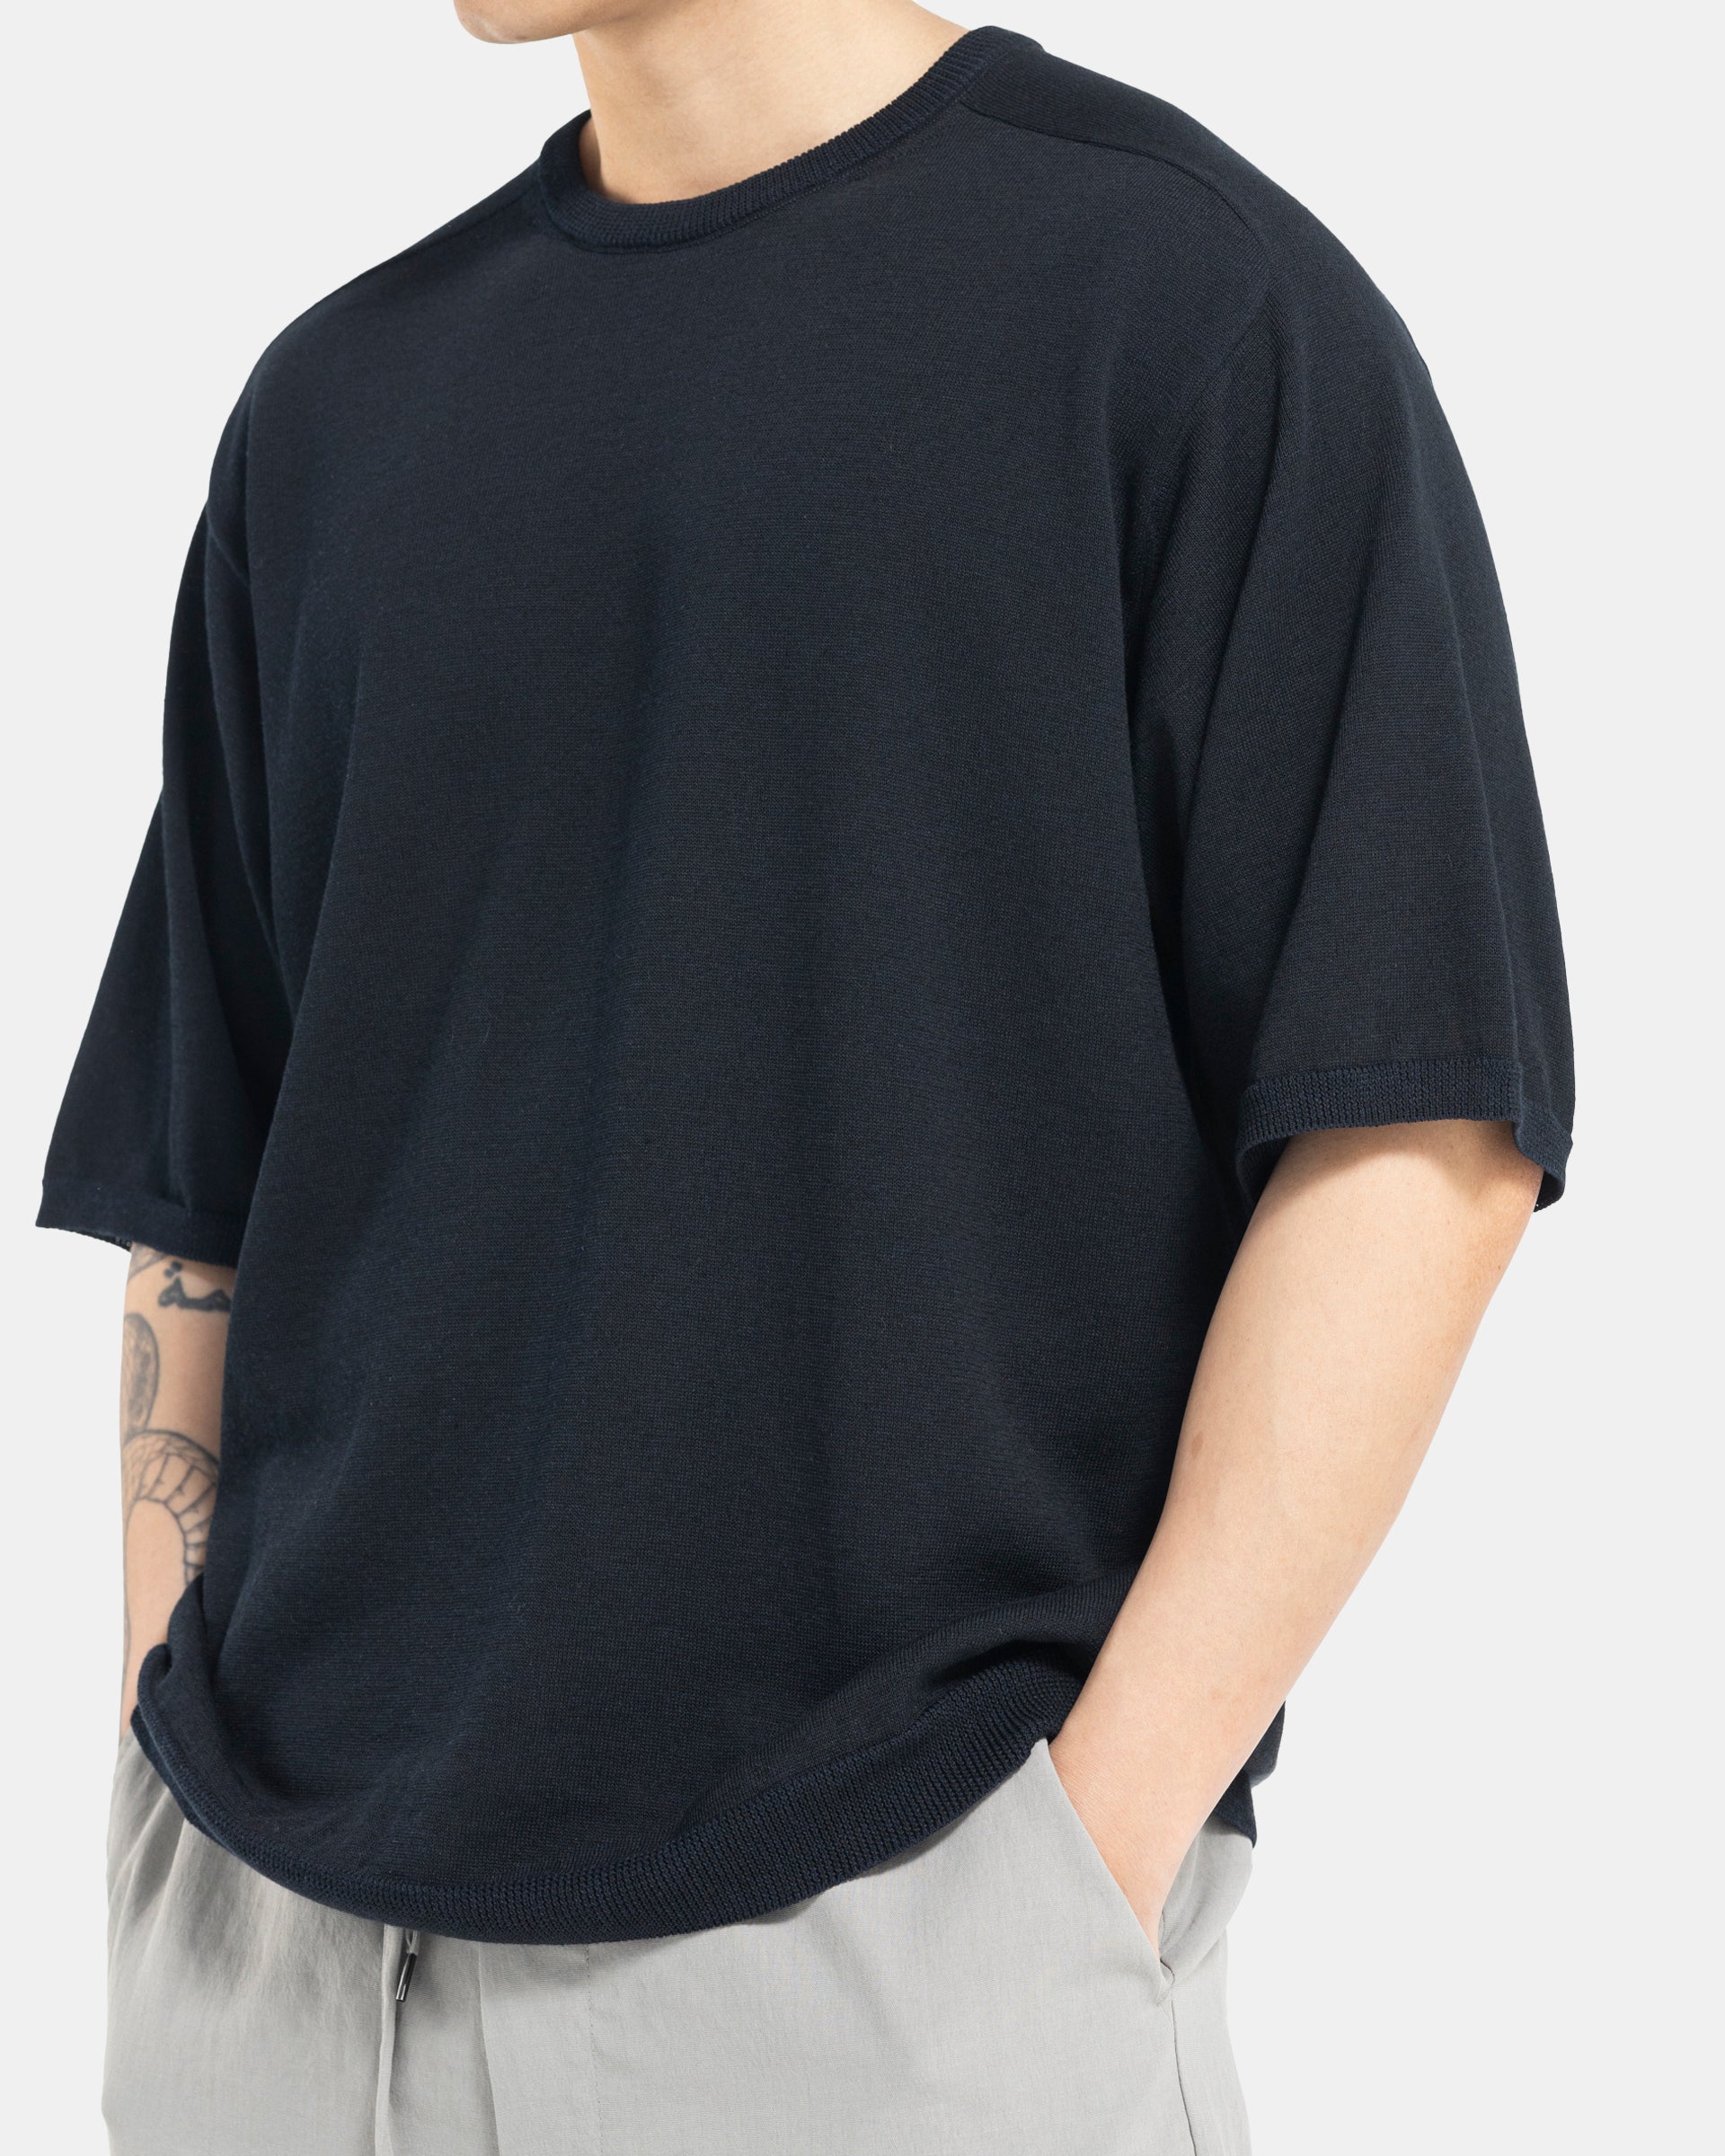 Male model wearing black Still By Hand knit T-shirt on white background